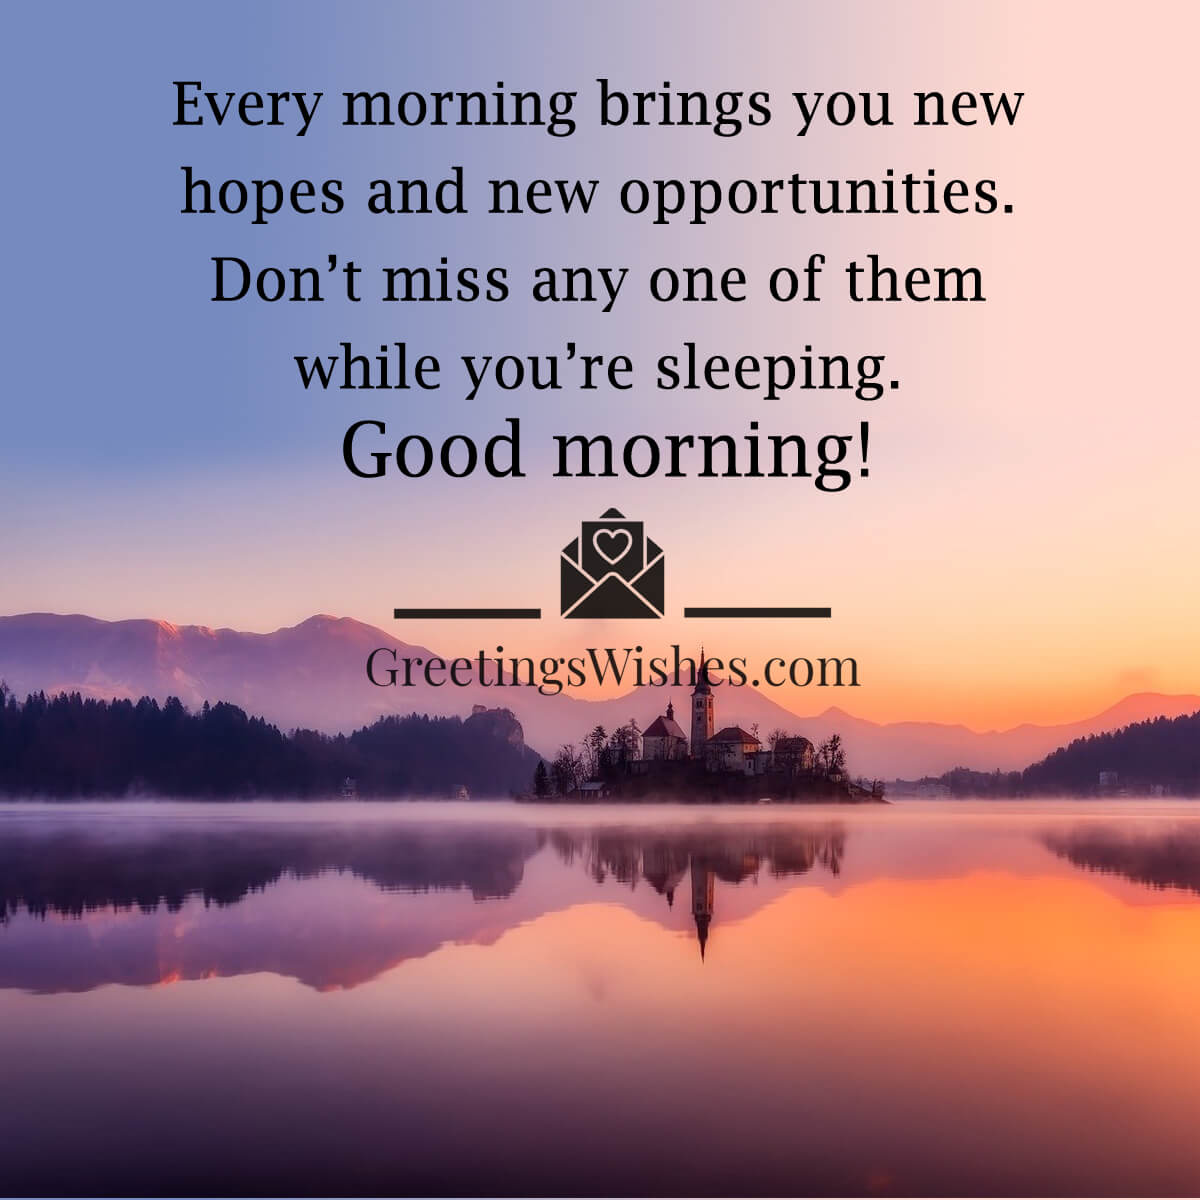 Good Morning Wishes - Greetings Wishes